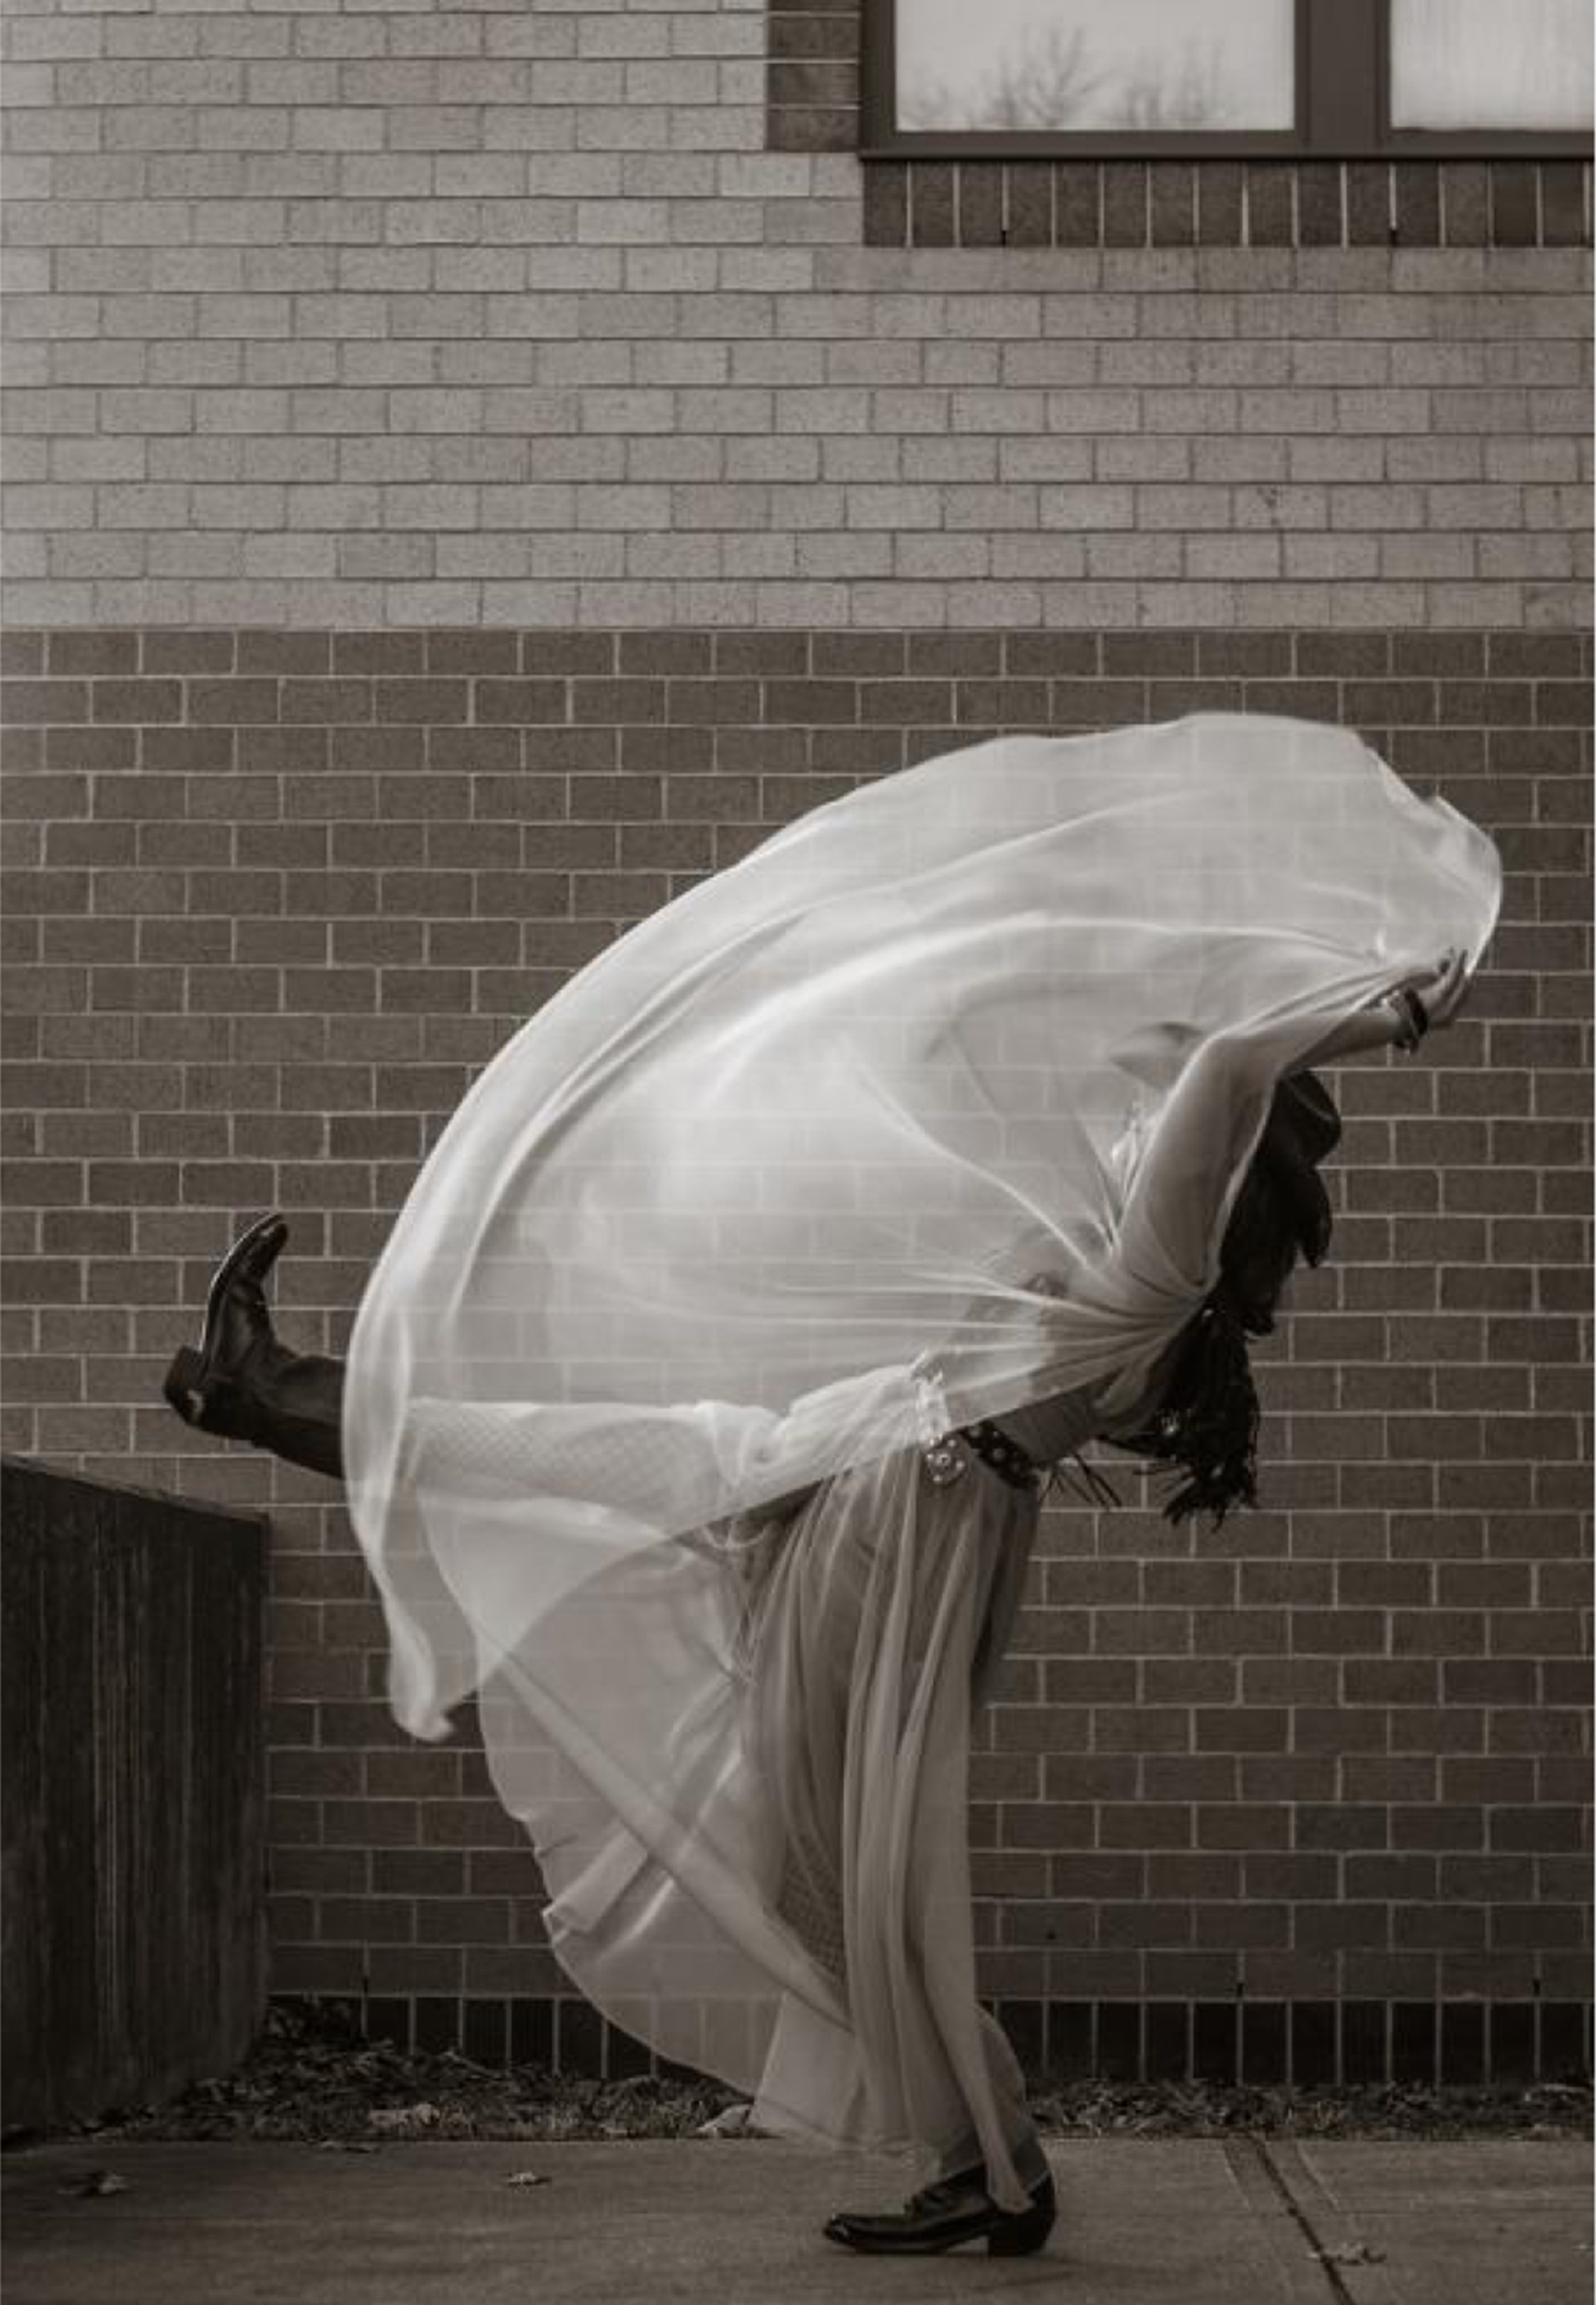 Photograph of a young black woman in a white dress kicking as part of a dance routine